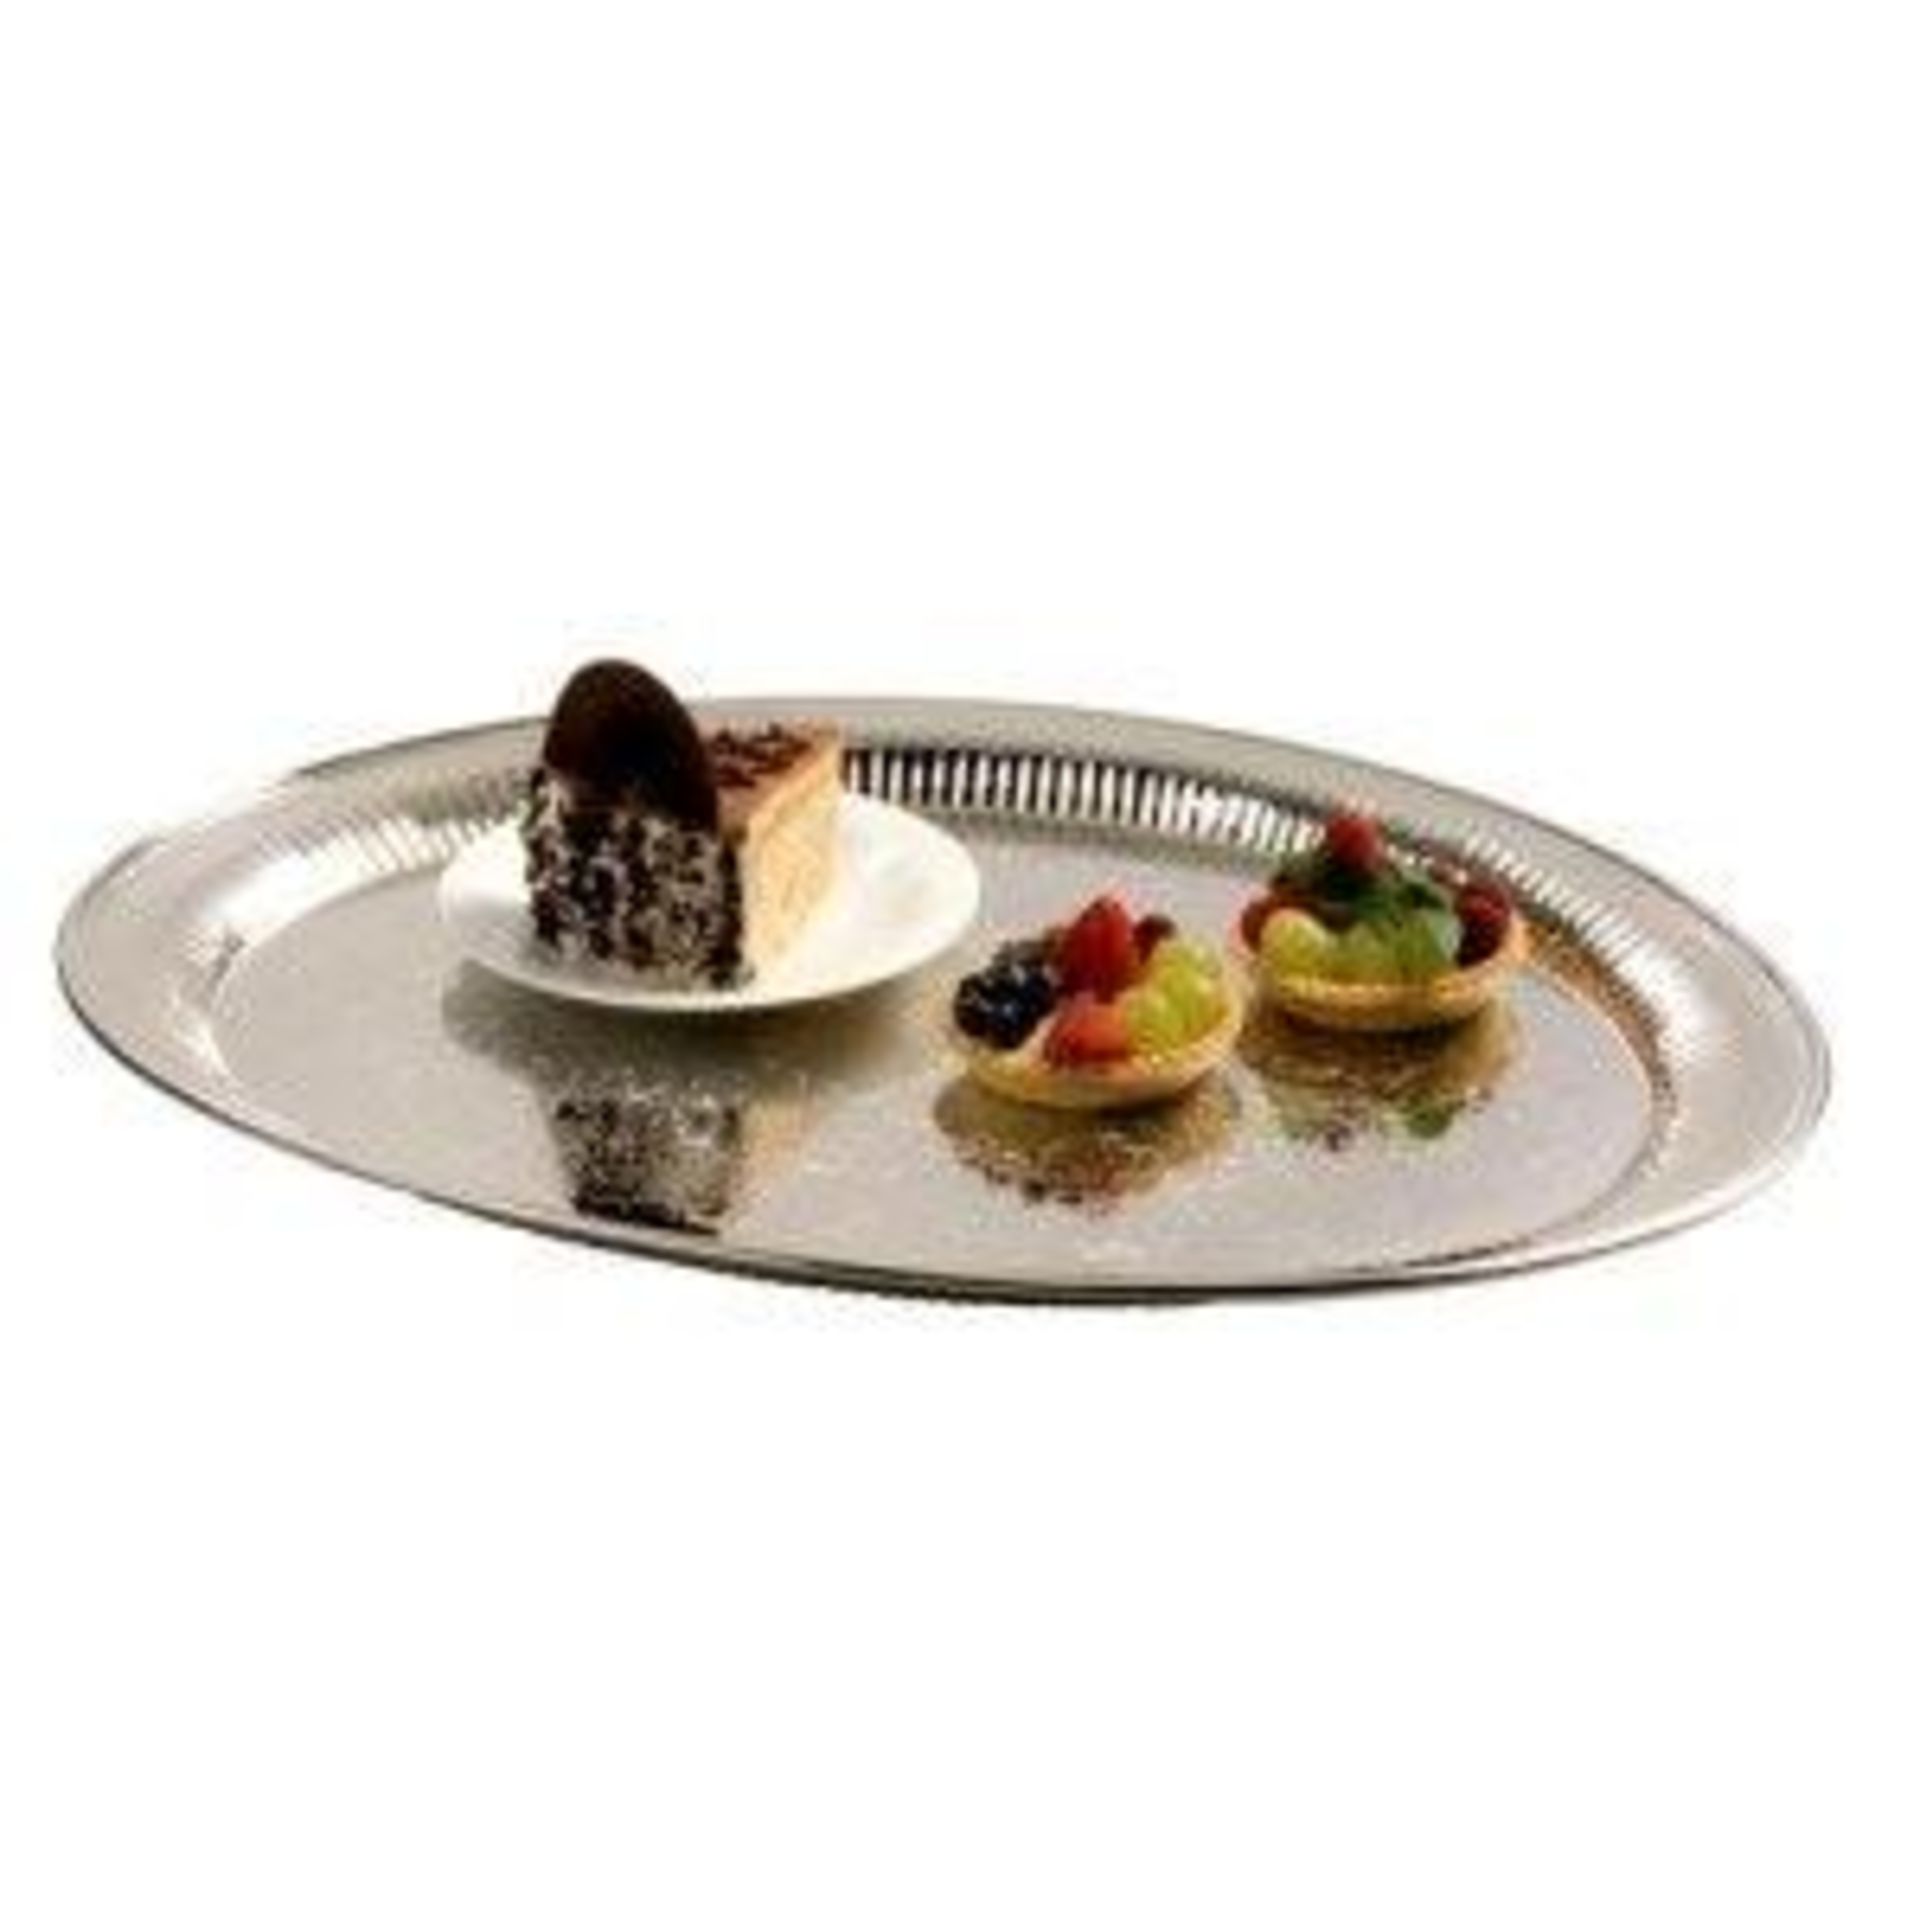 4 x Stainless Steel Oval Embossed Tray